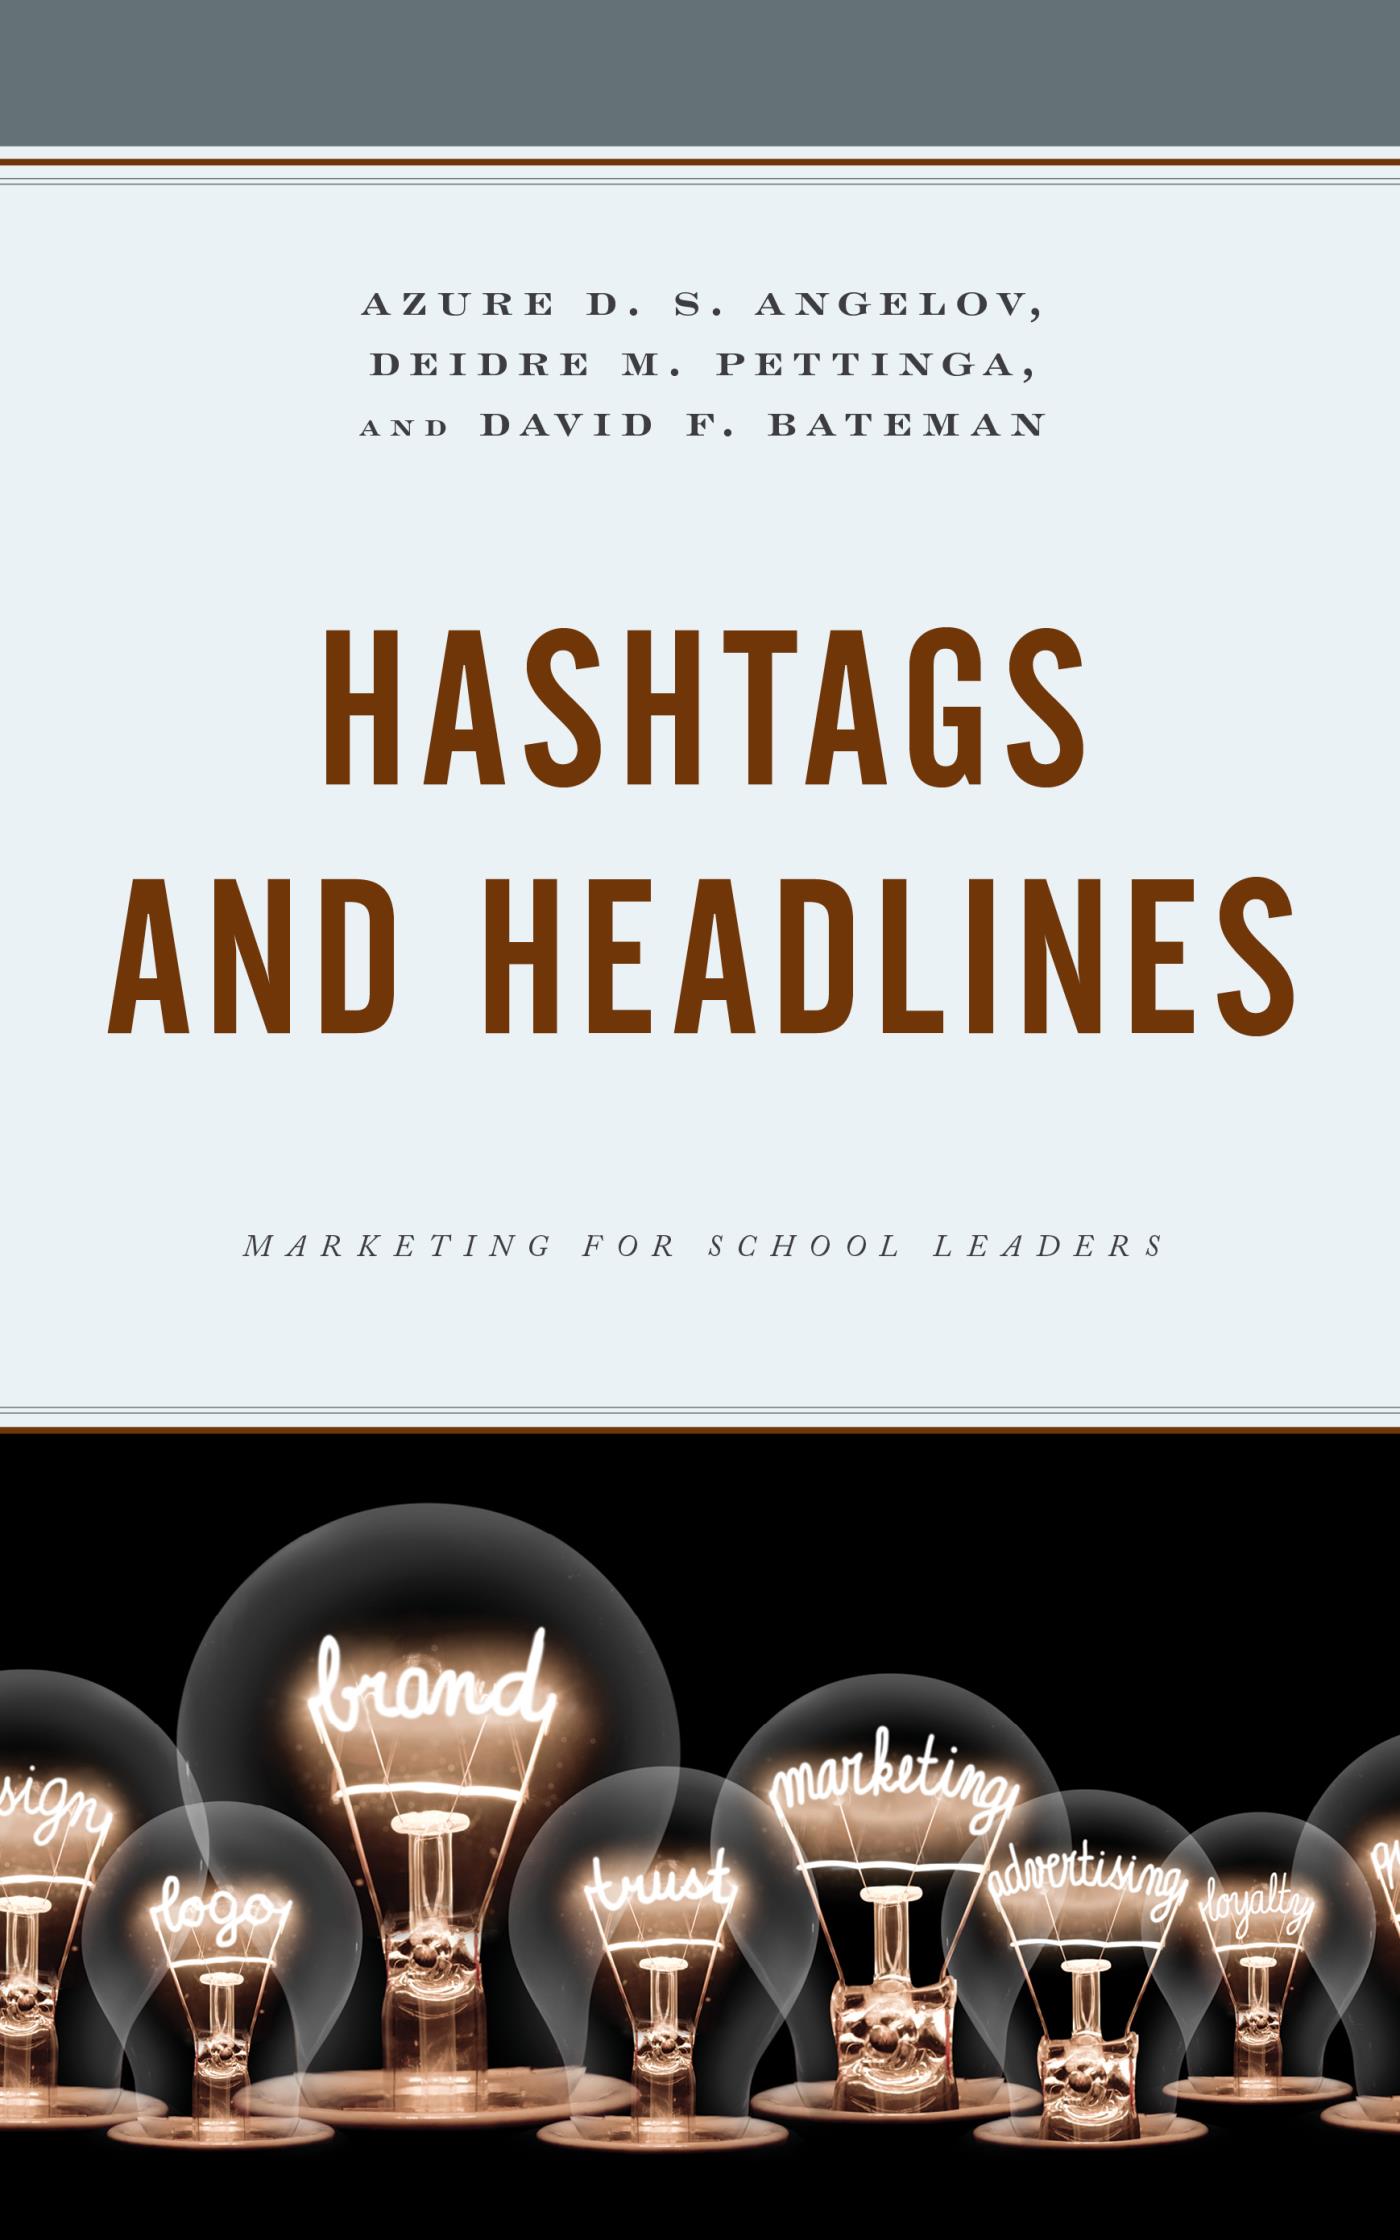 Hashtags and Headlines